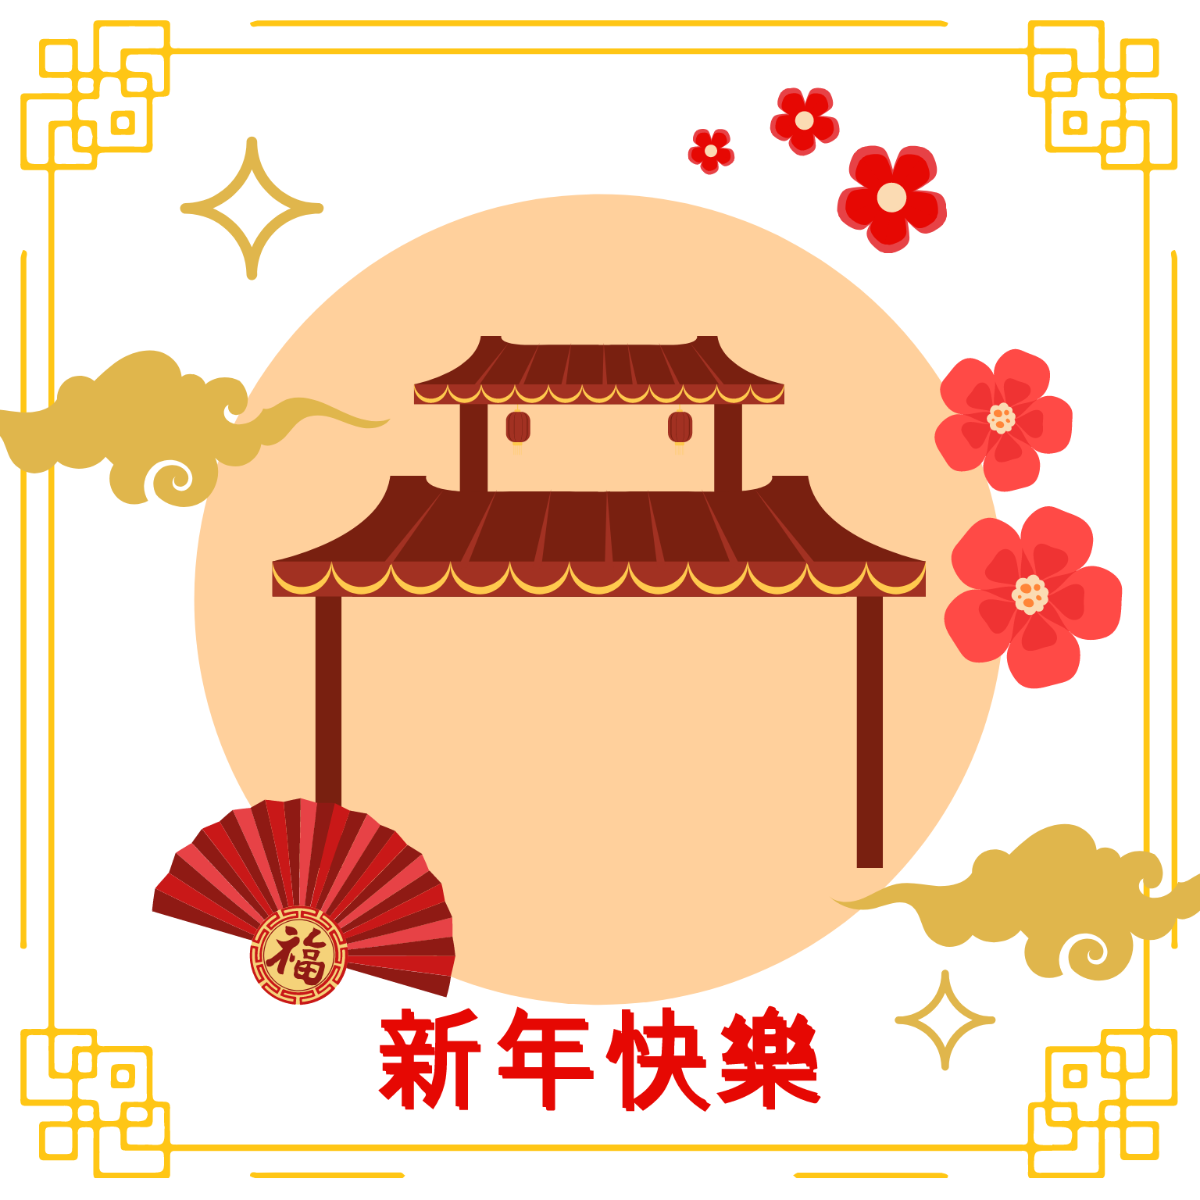 Chinese New Year Flat Design Vector Template